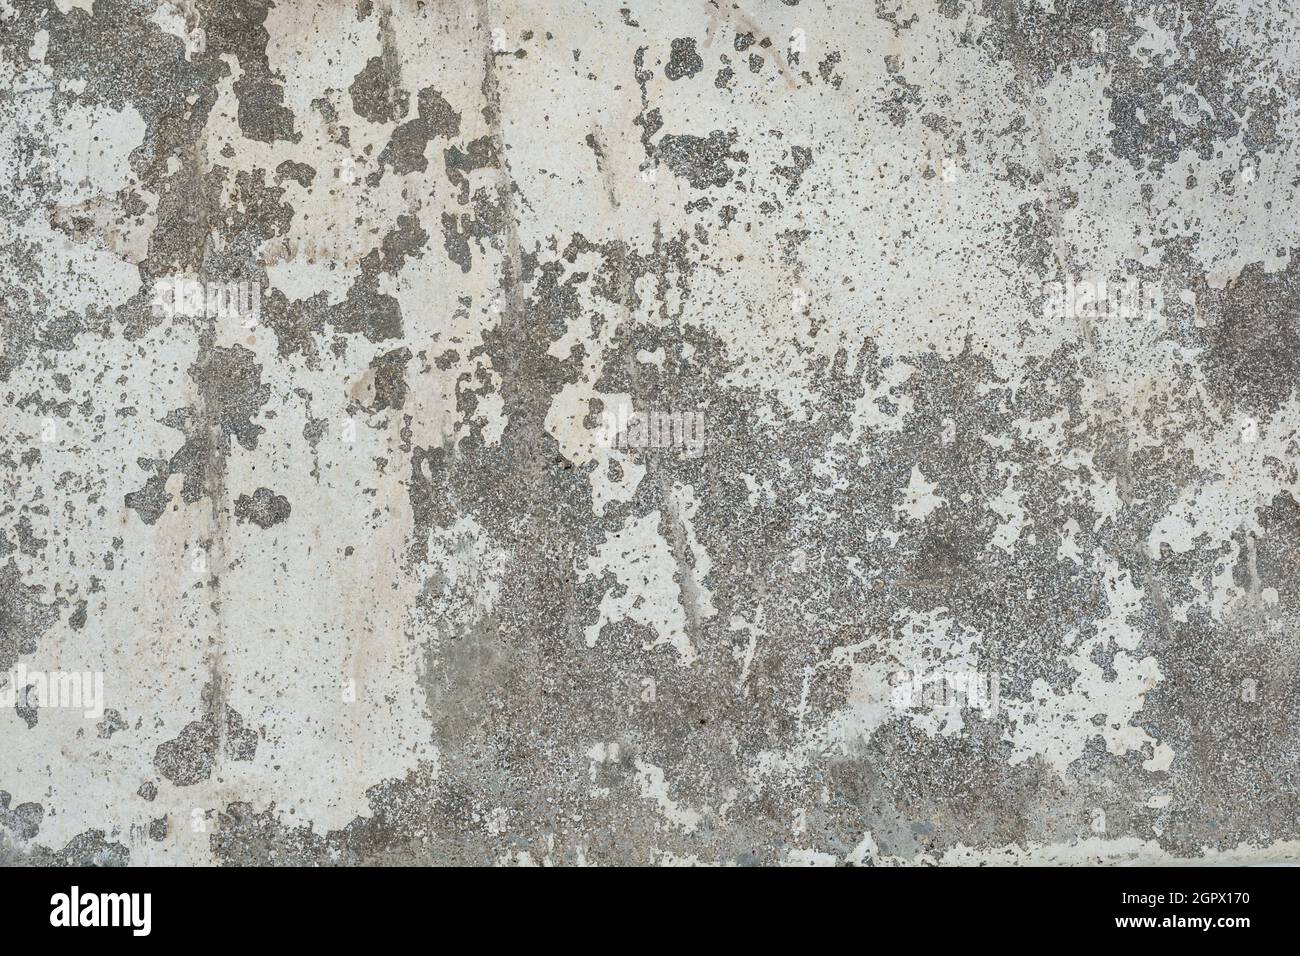 black and white photography backdrop, empty full frame background, broken and old concrete wall surface texture, top down view Stock Photo